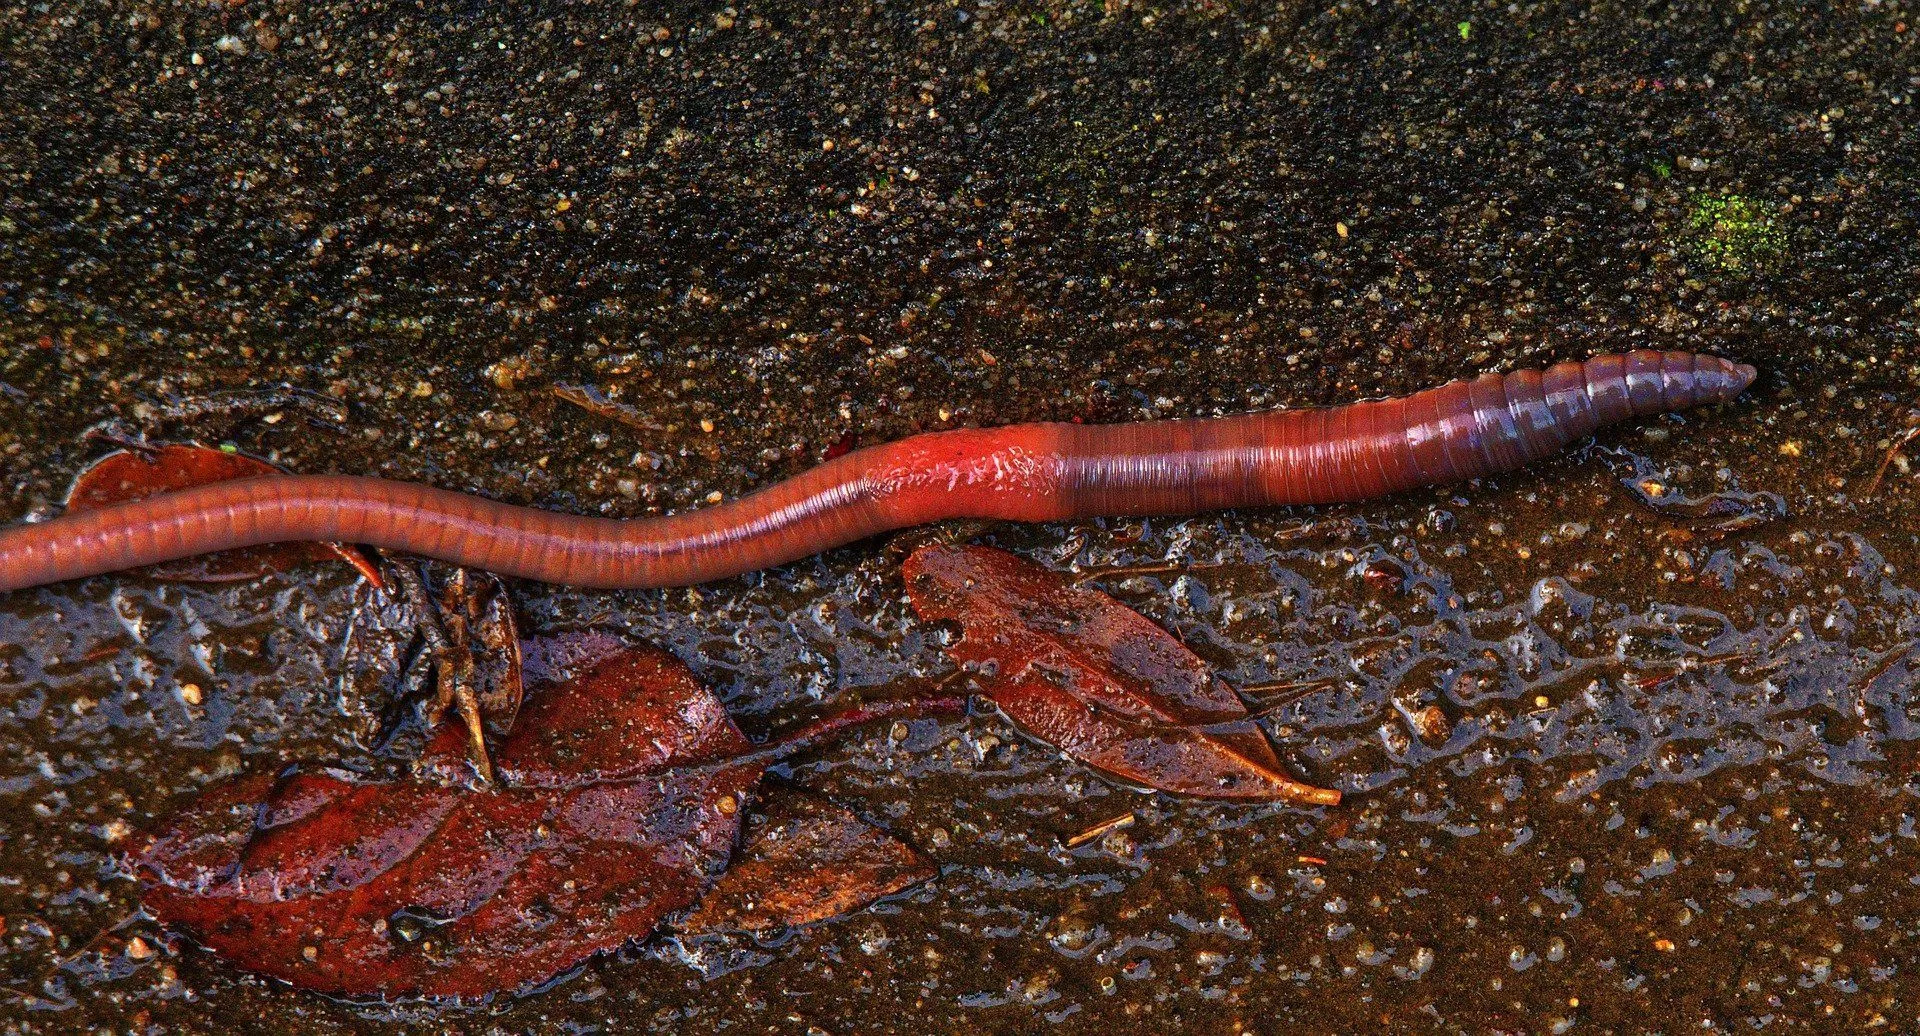 Earthworms have no eyes and no legs but can sense light.